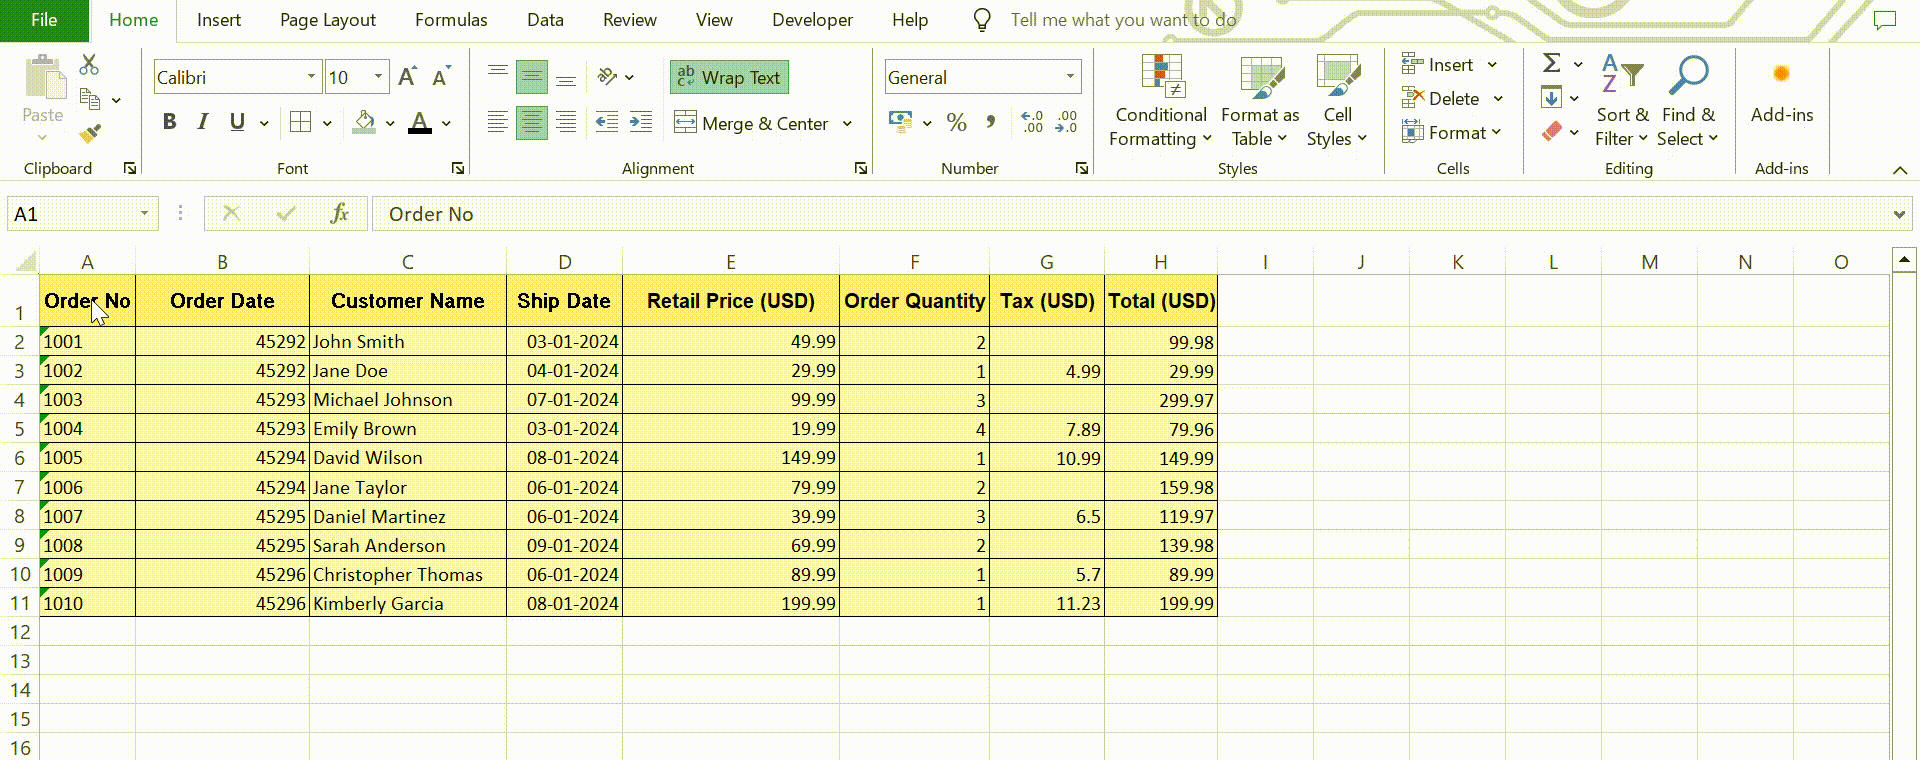 How to Delete Rows in Excel